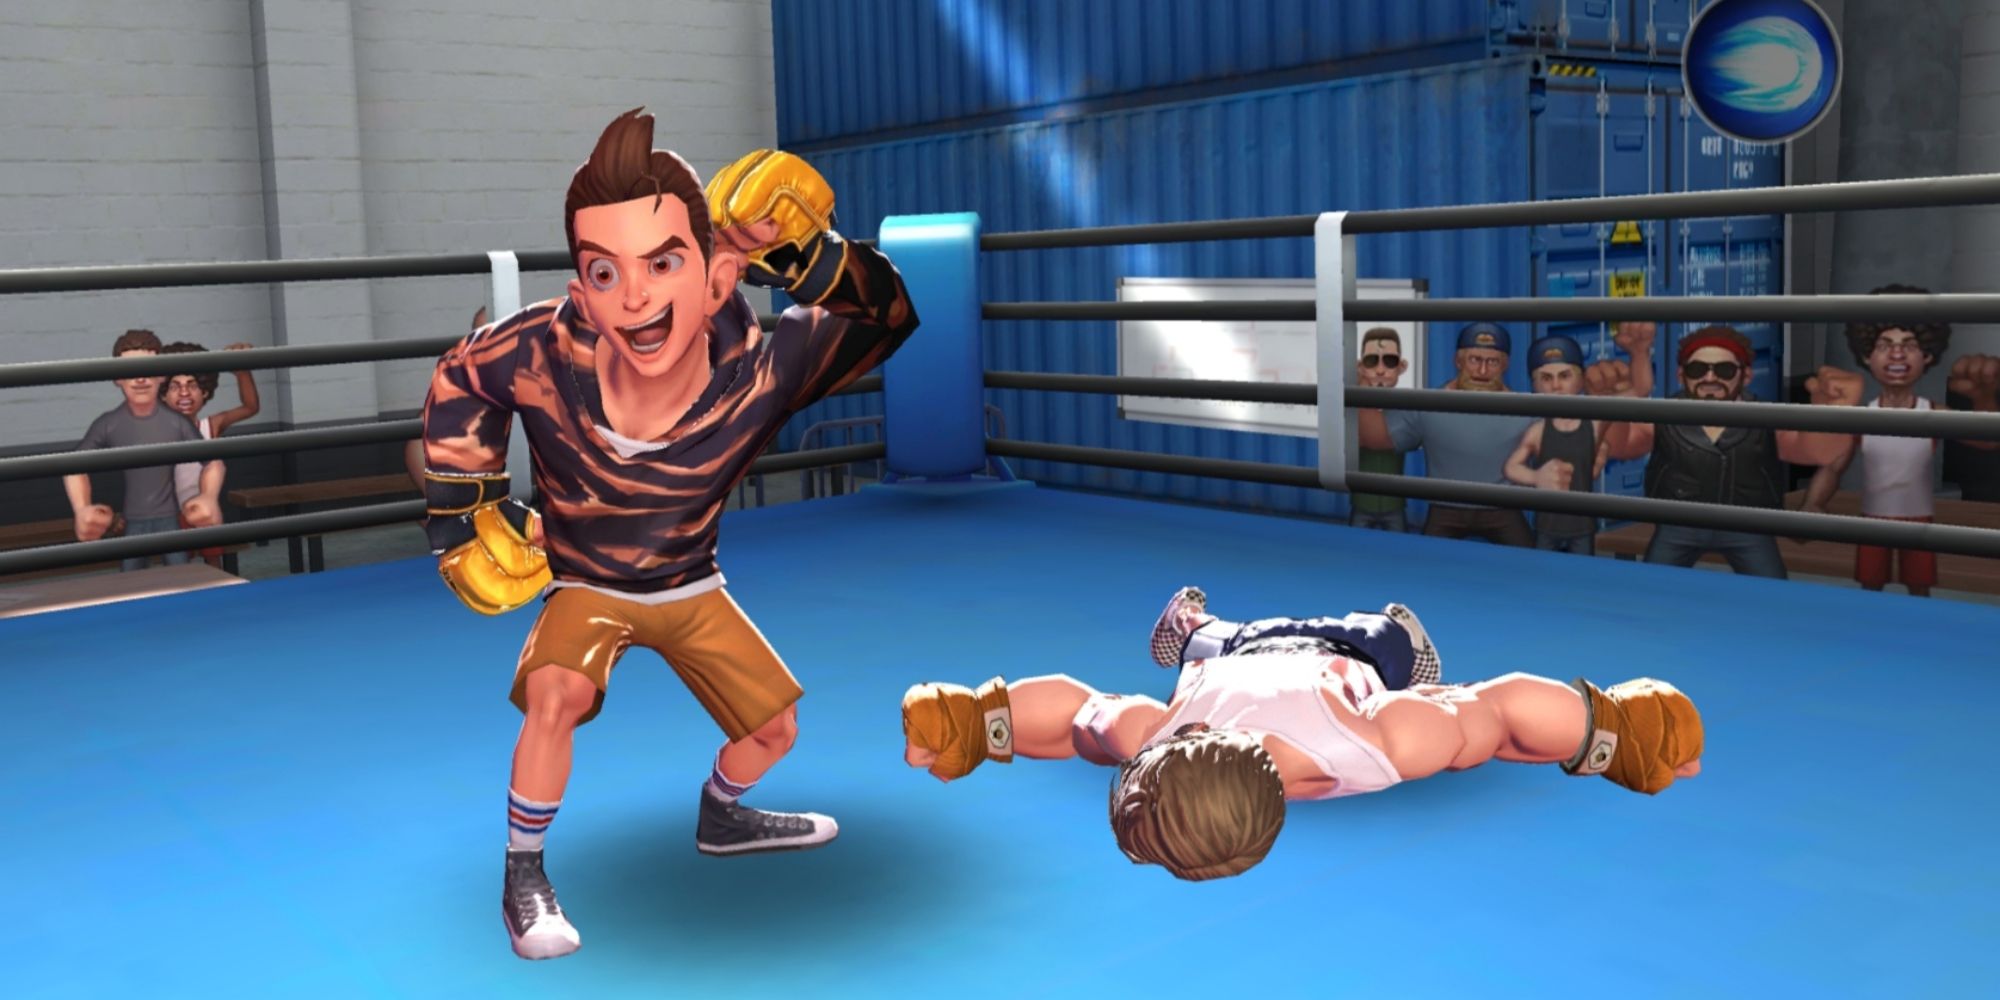 Jin from Boxing Star celebrating his victory and his opponent knocked out in the boxing ring